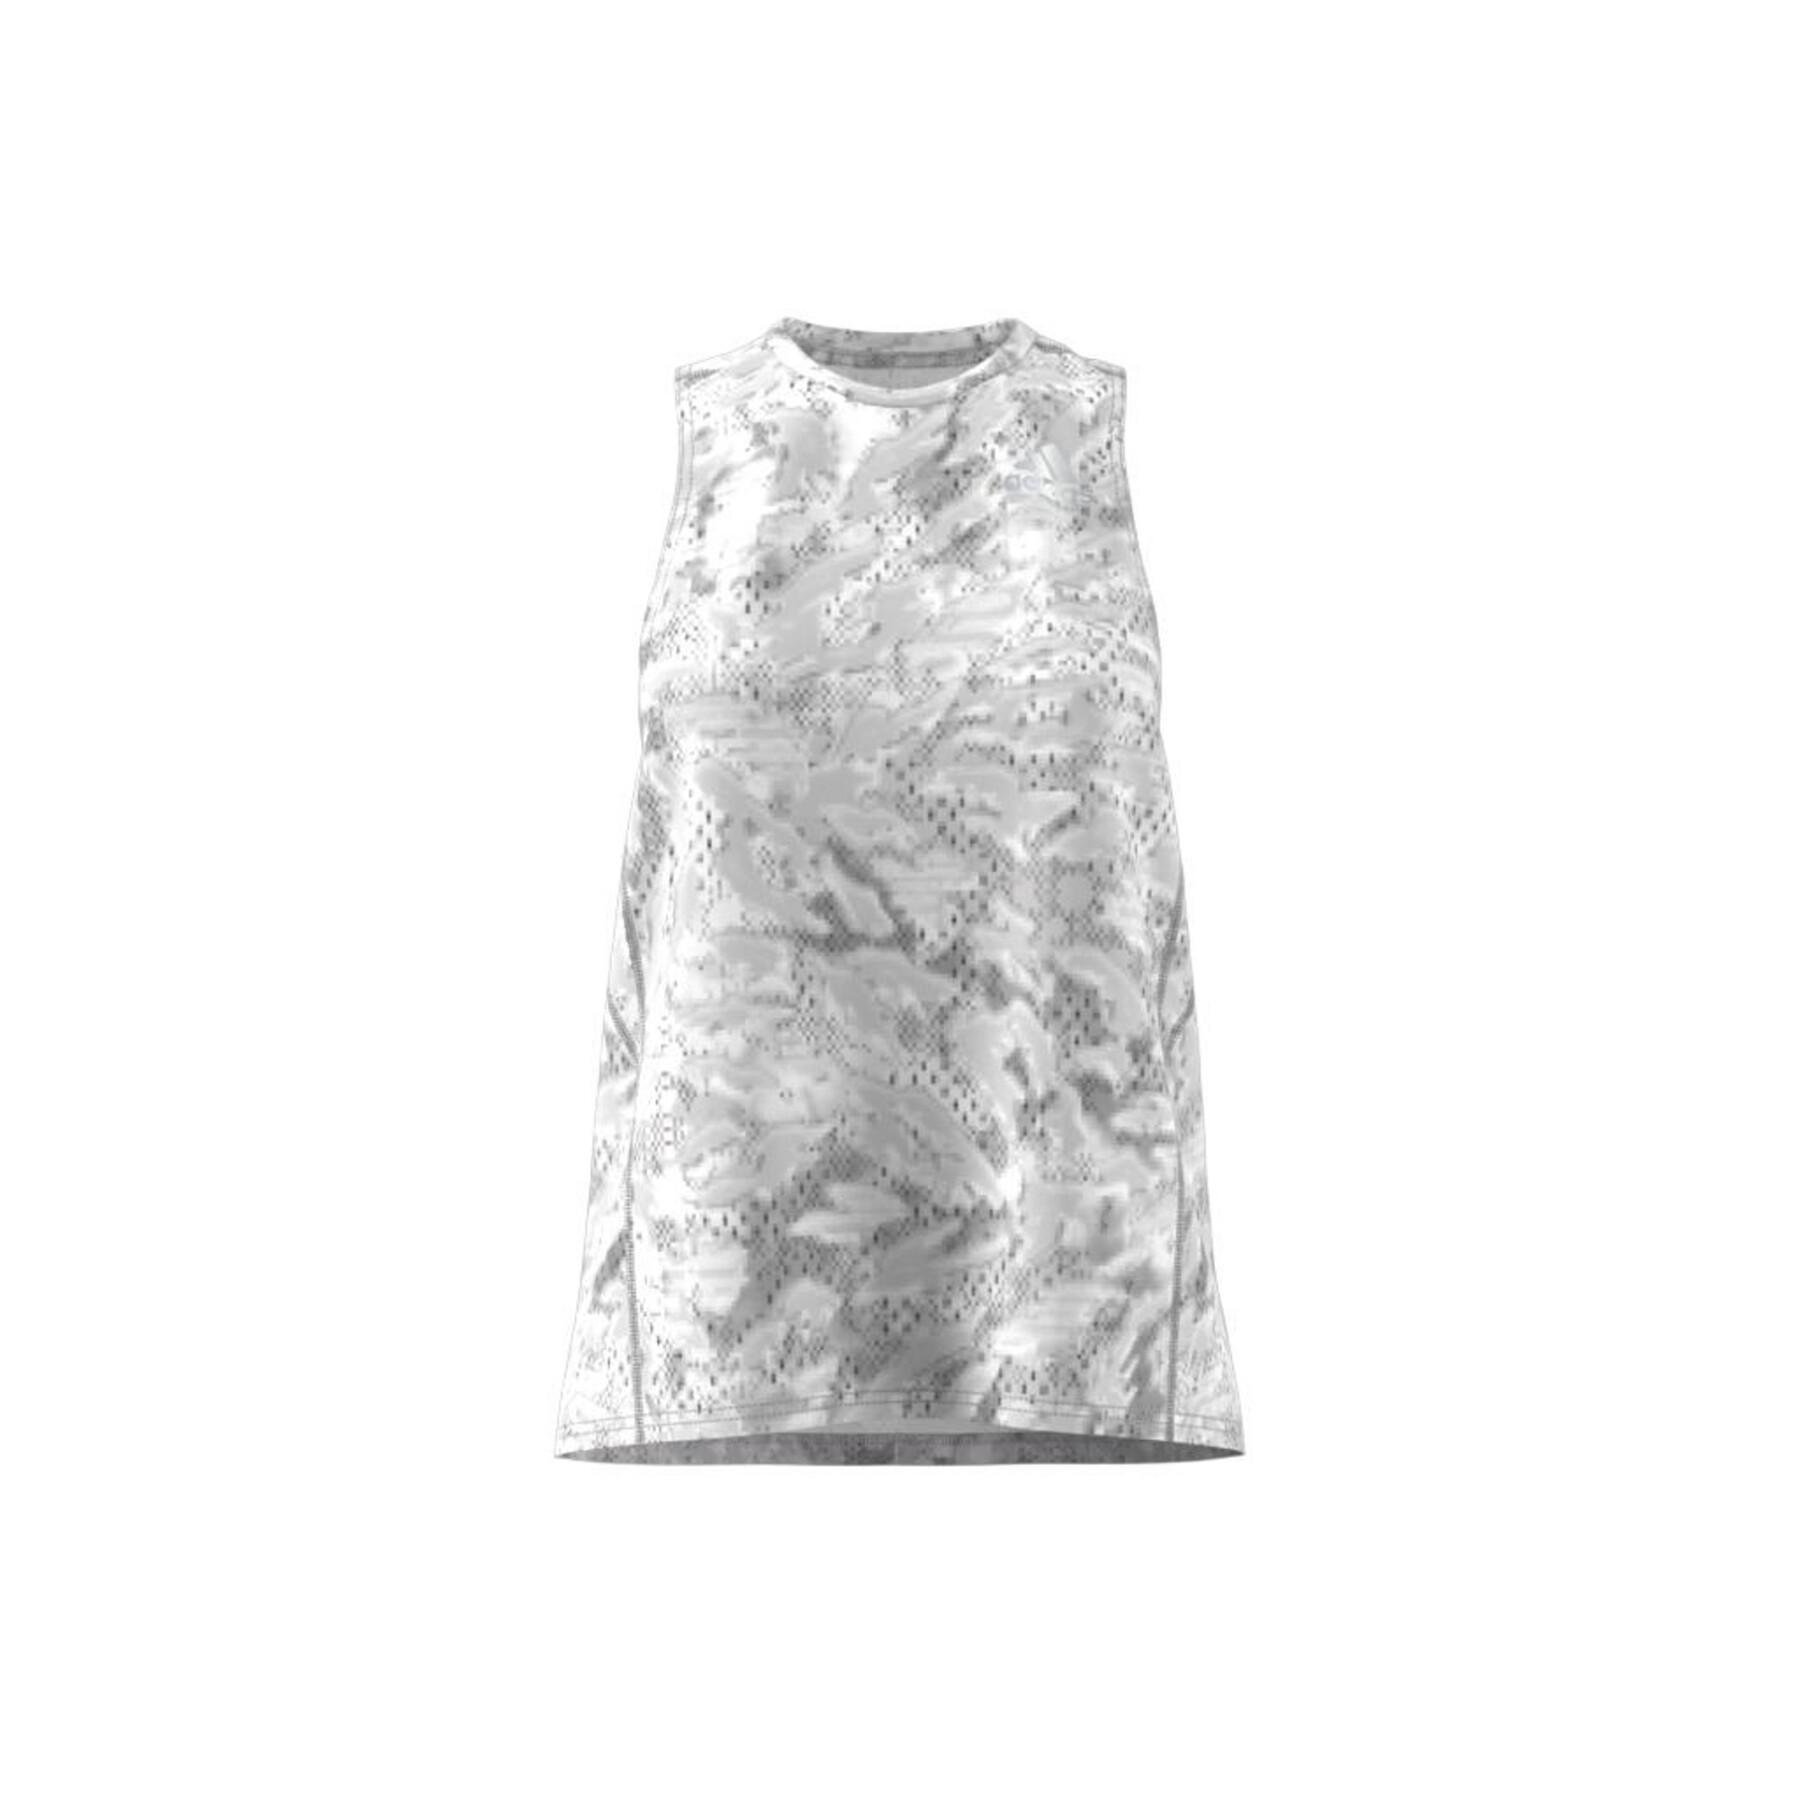 Women's tank top adidas Fast Graphic